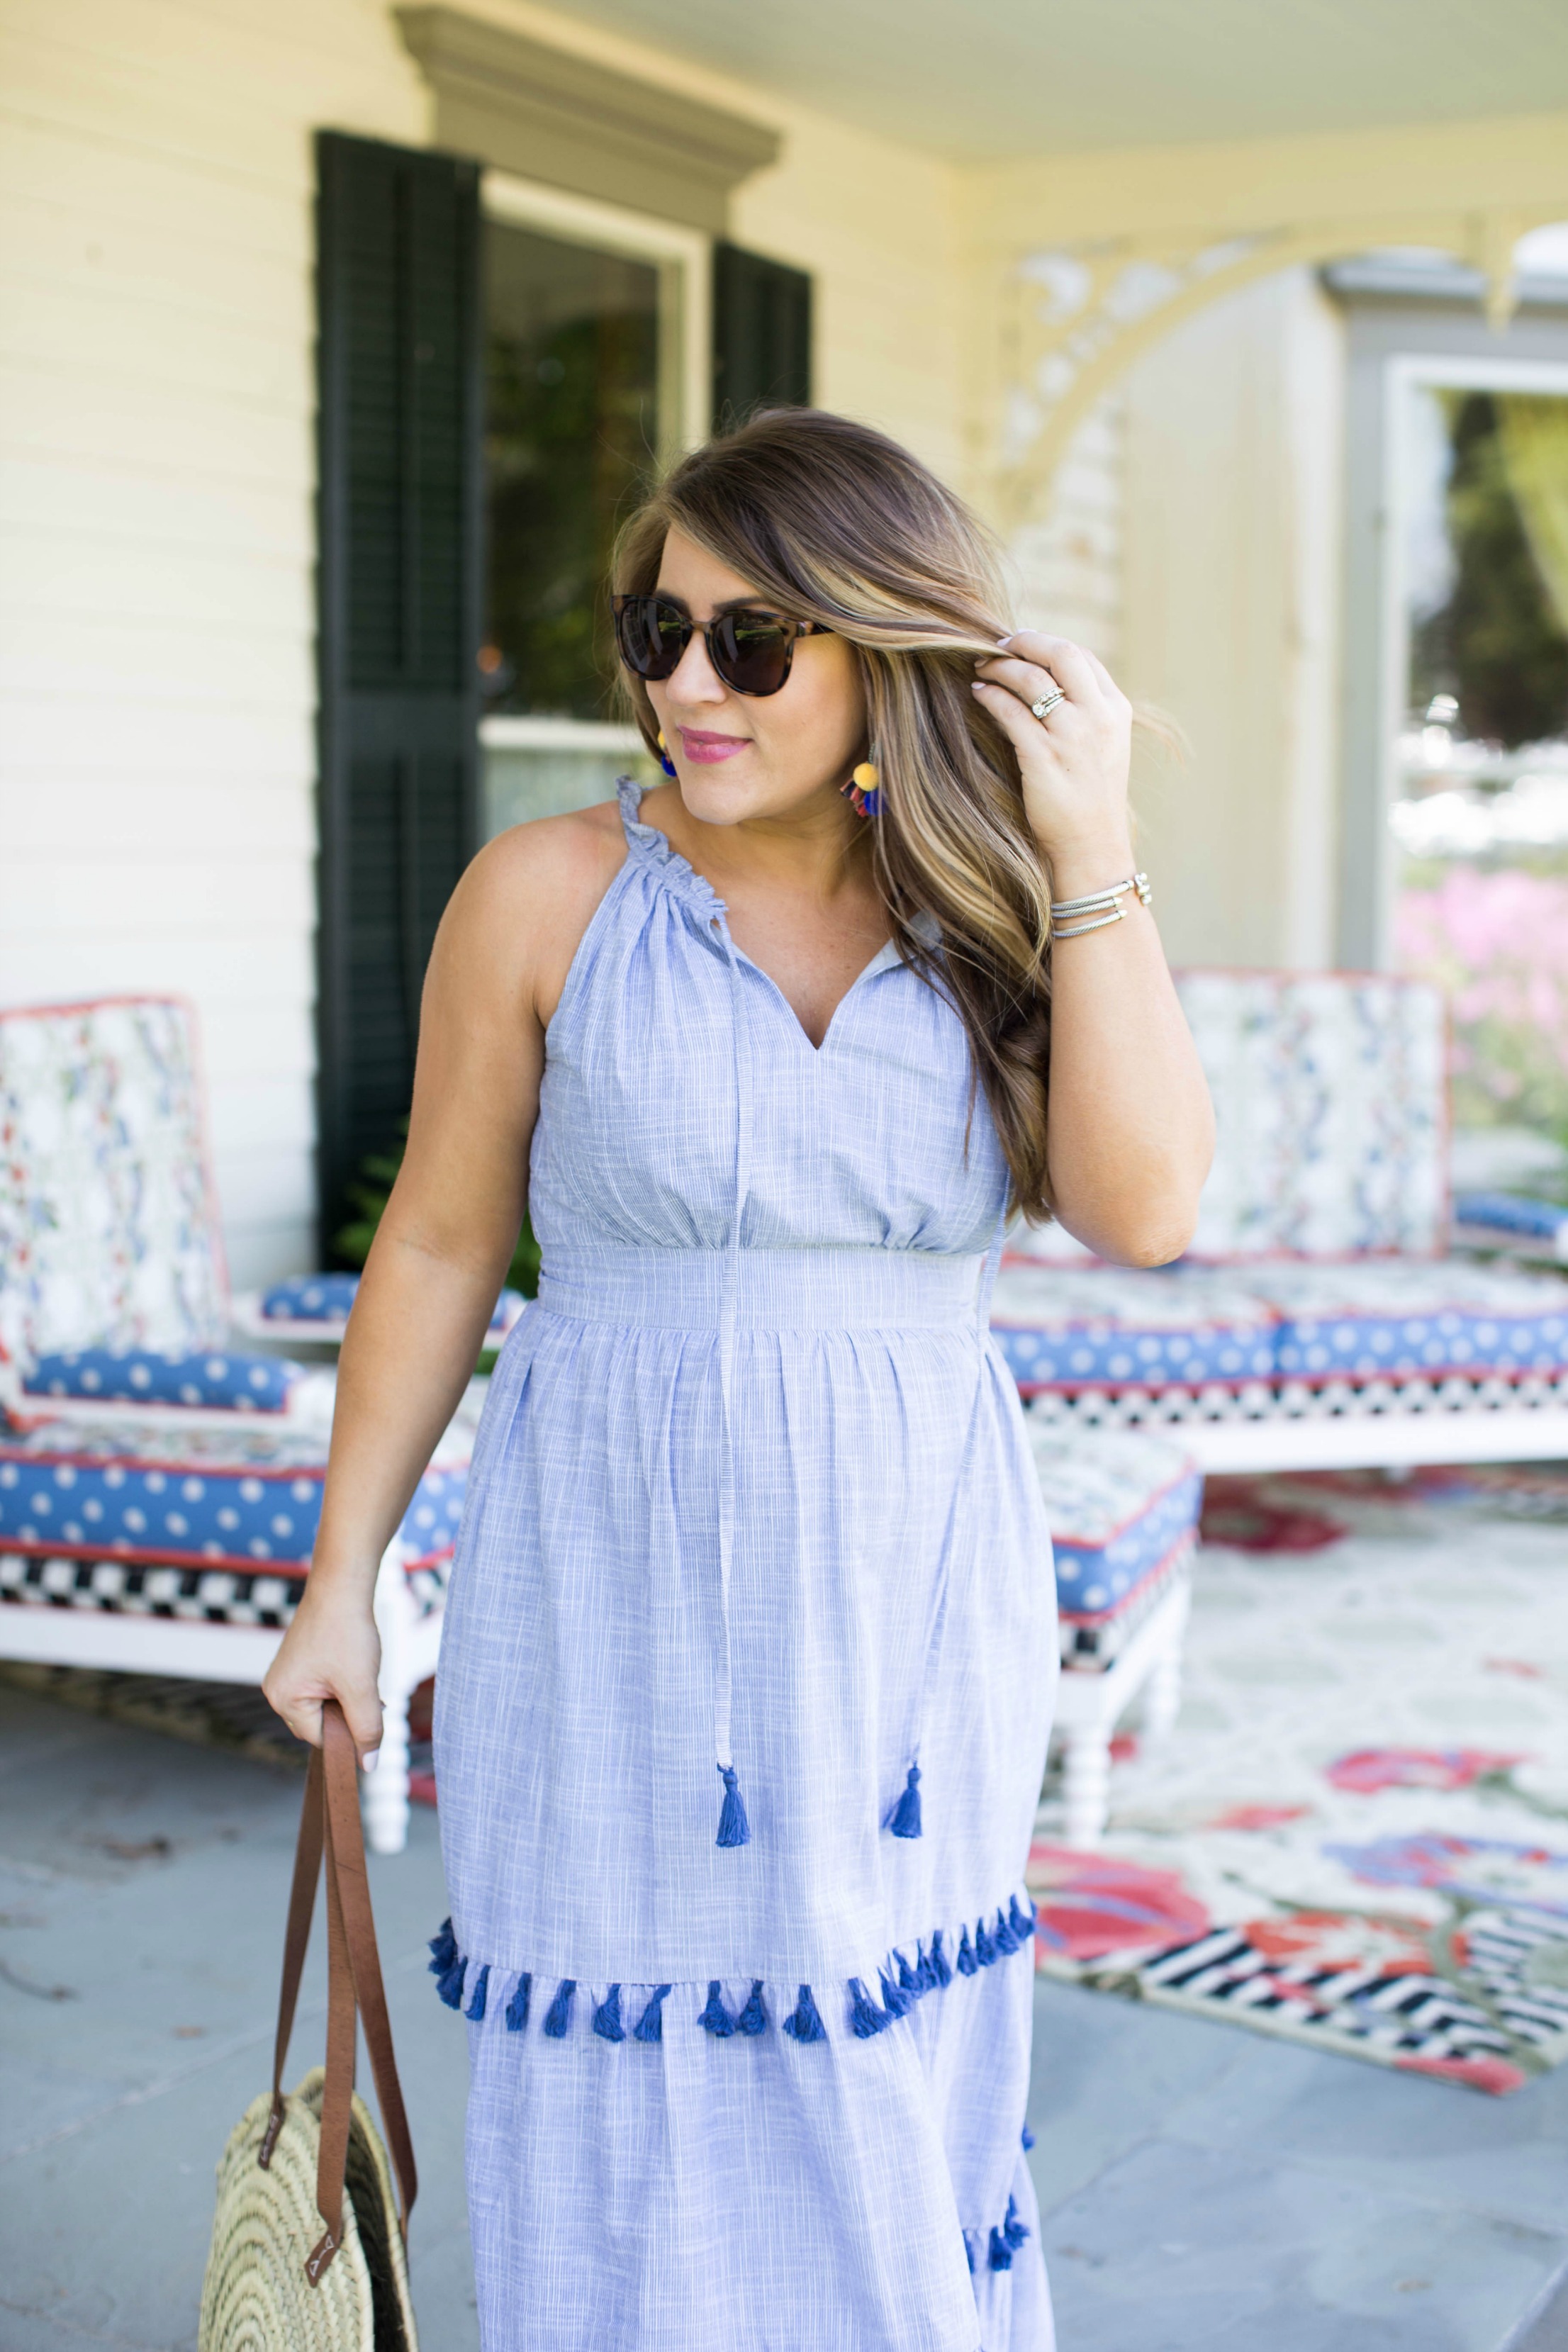 Vacation Outfits at MacKenzie-Childs by NC fashion blogger Coffee Beans and Bobby Pins